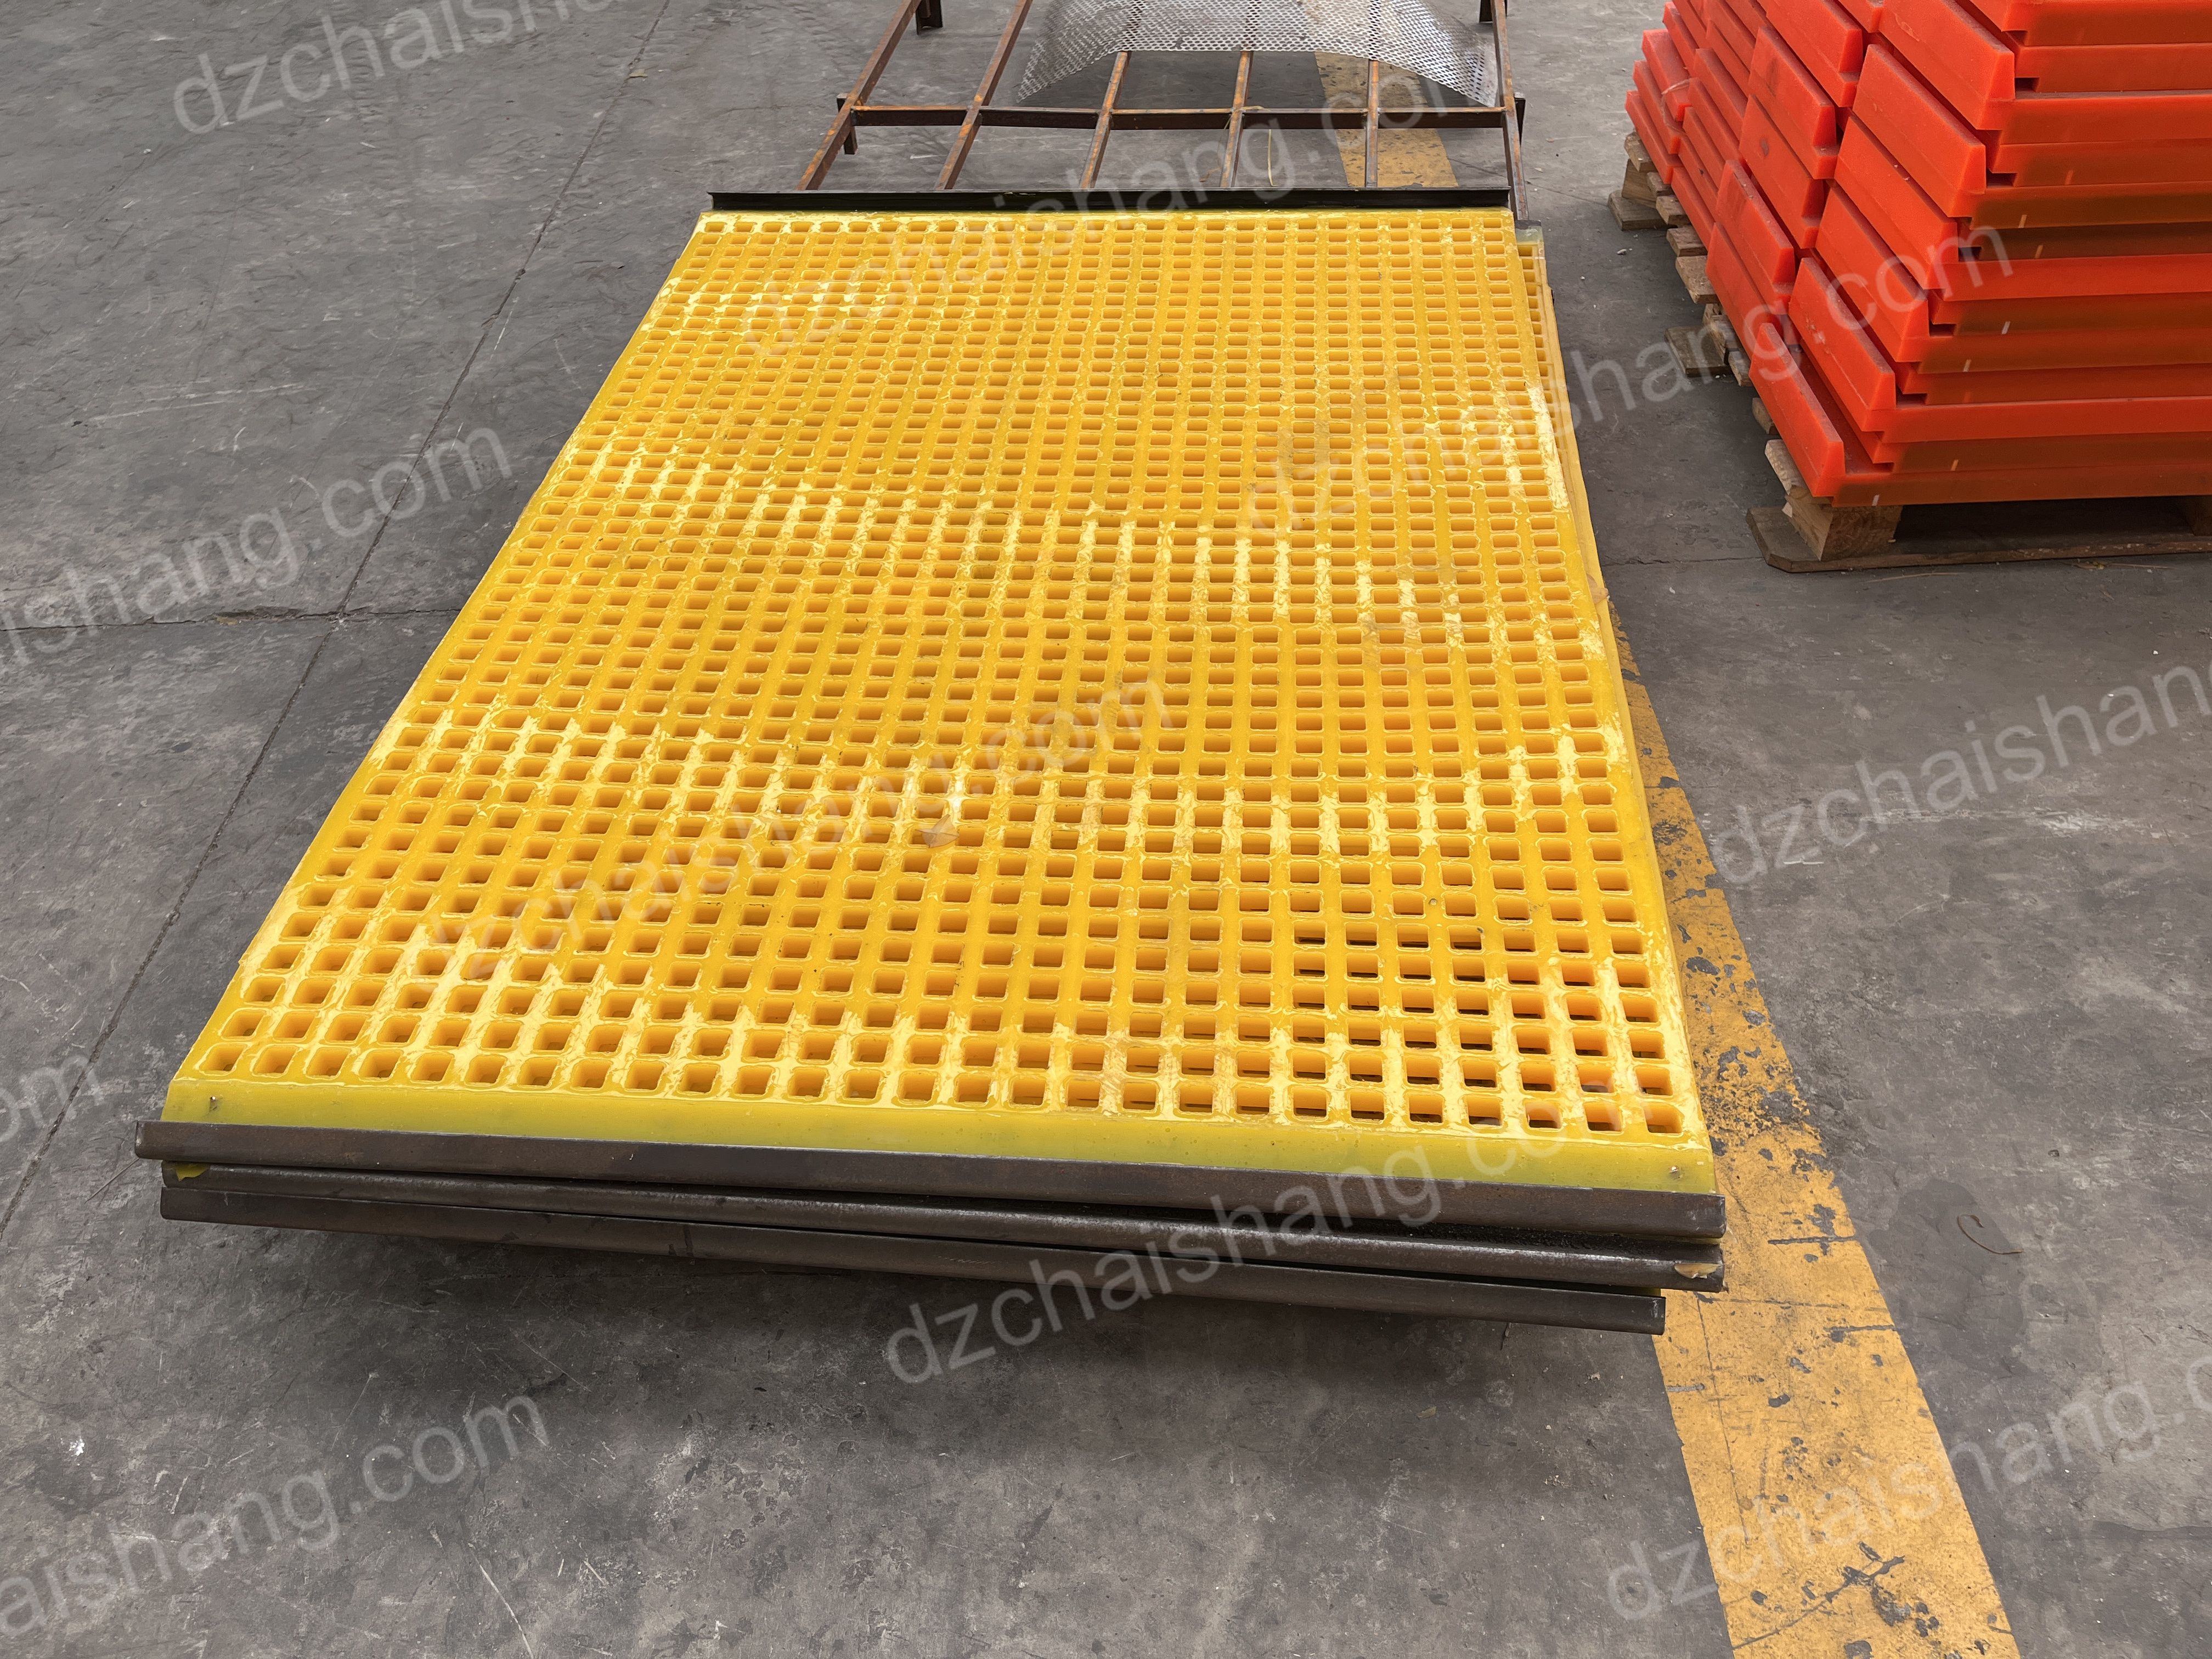 Exploring the Benefits of China’s Vibrator Flip Flop Polyurethane Mesh Provider Aggregate for Ore Processing-CHAISHANG | Polyurethane Screen,Rubber Screen PanelsHigh frequency screen mesh,Belt Cleaner,Flotation Cell